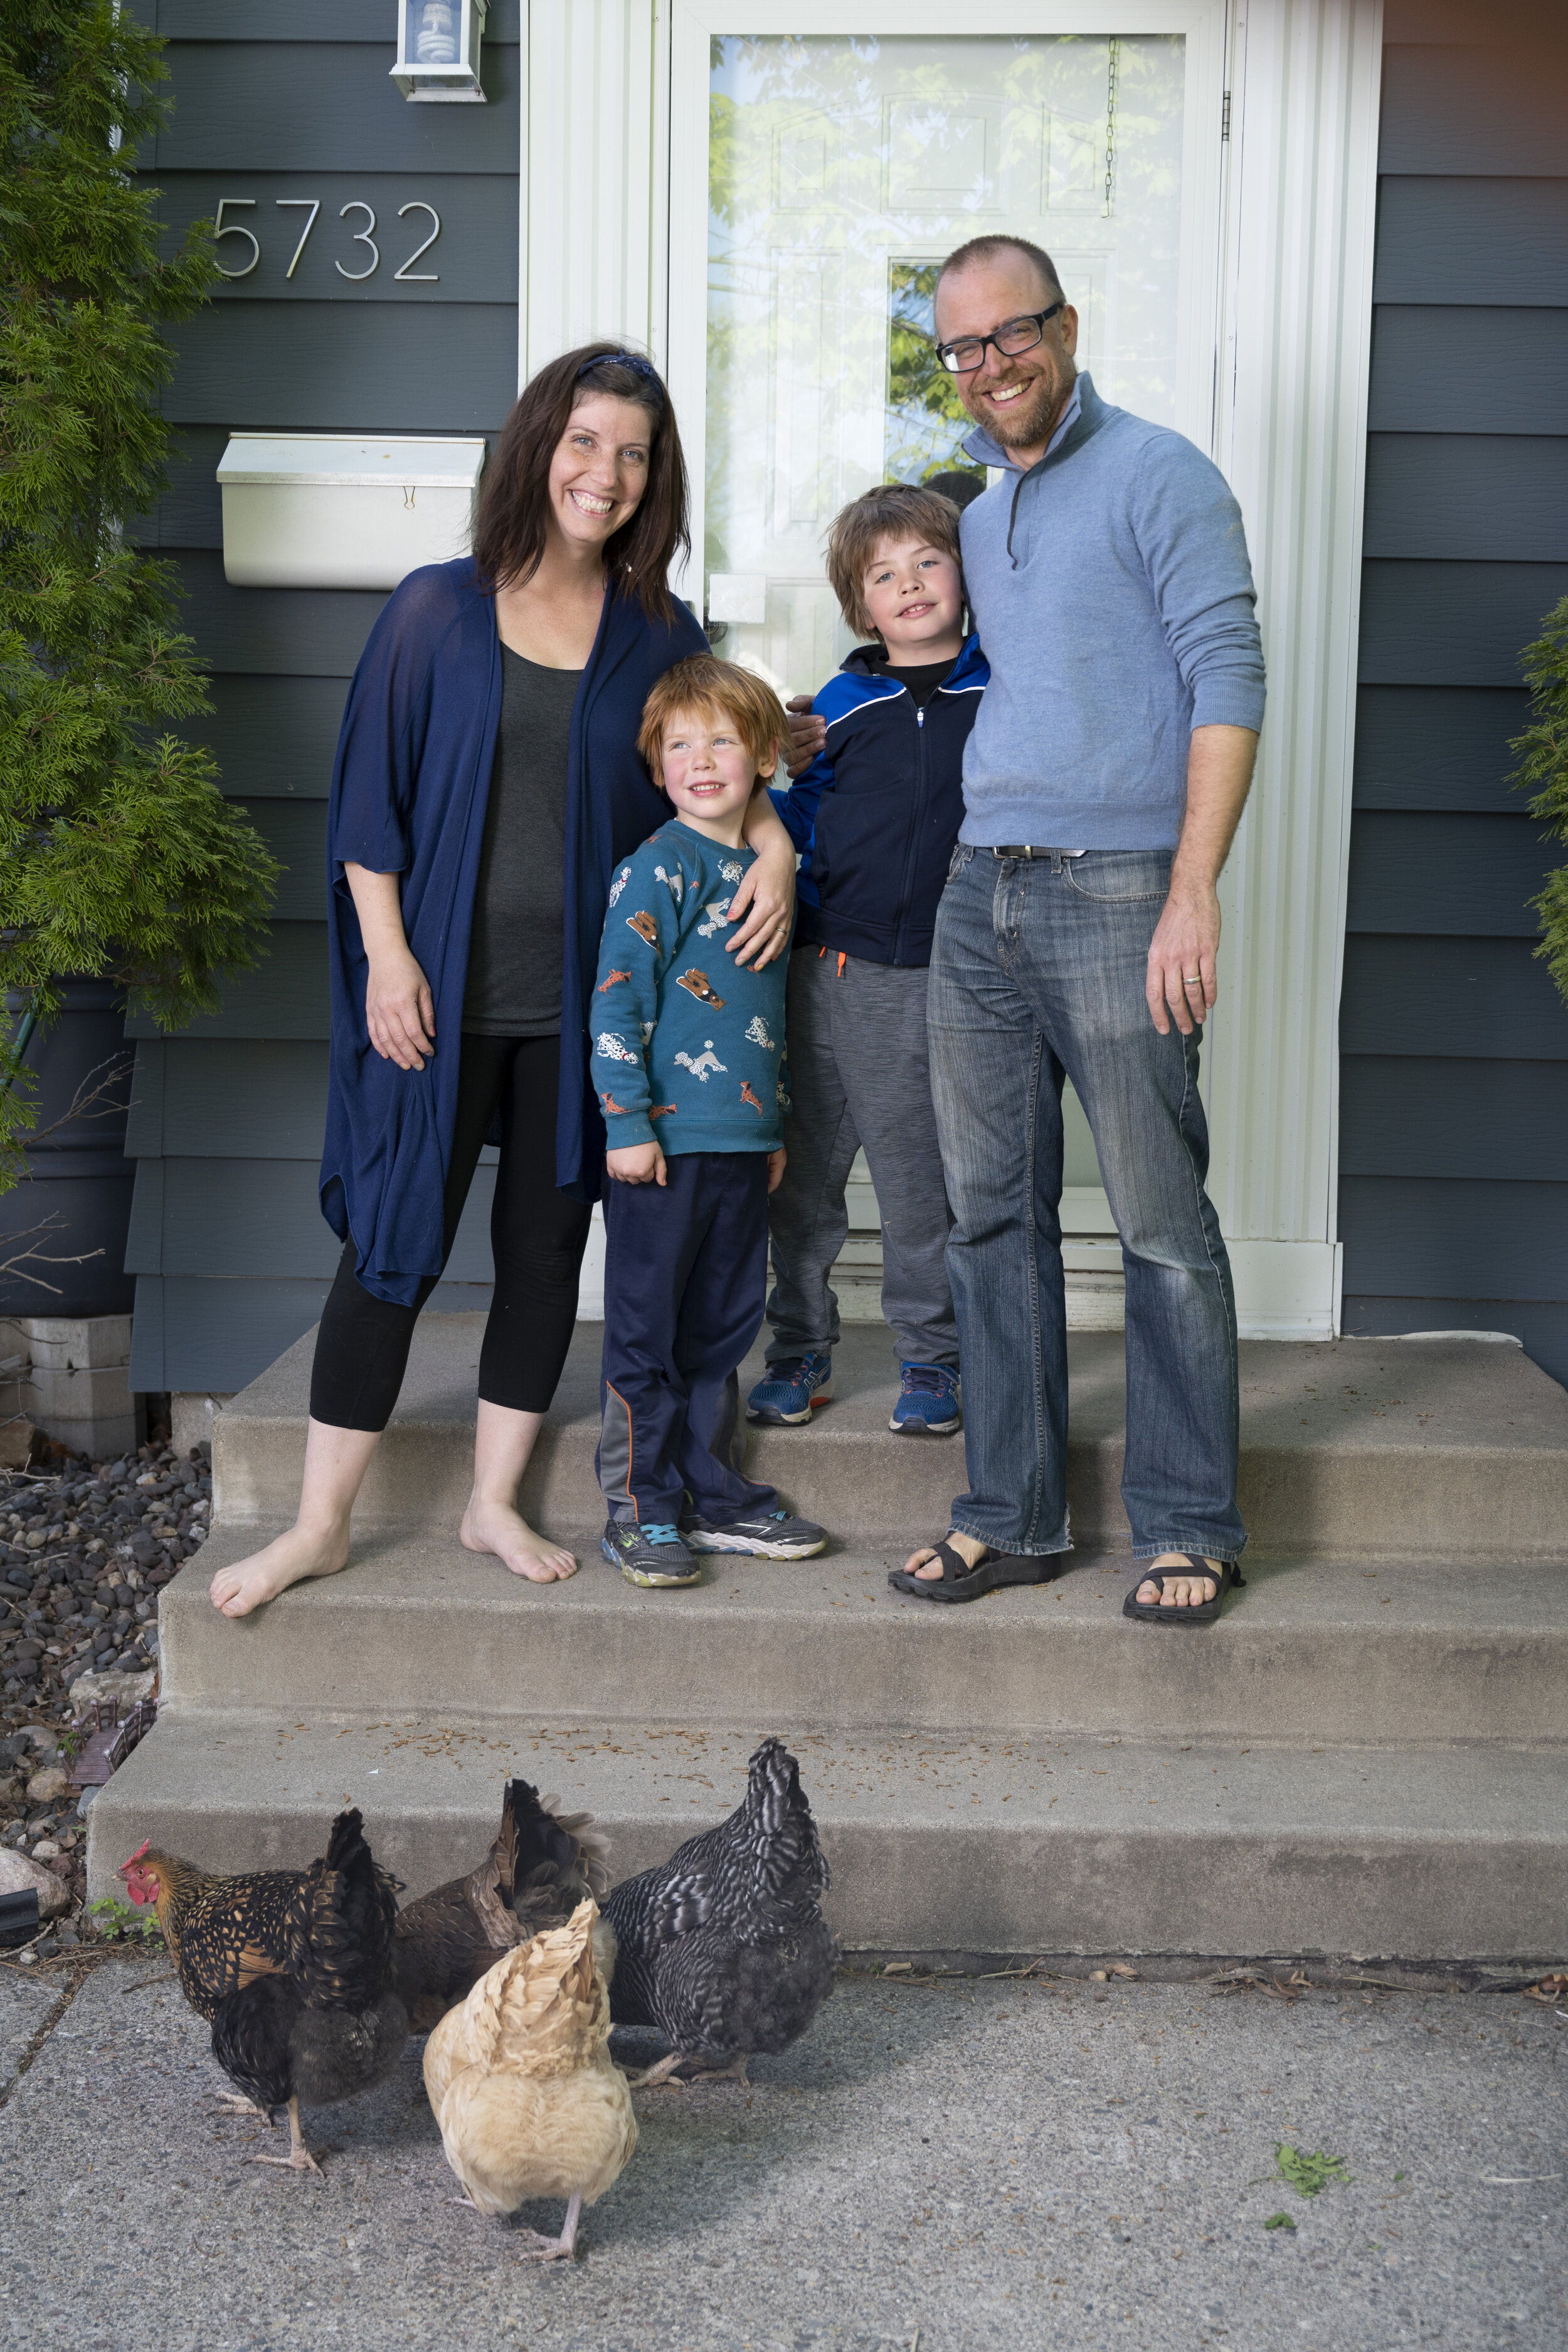 Minneapolis Council Member Ward 11, Jeremy Schroeder and Family